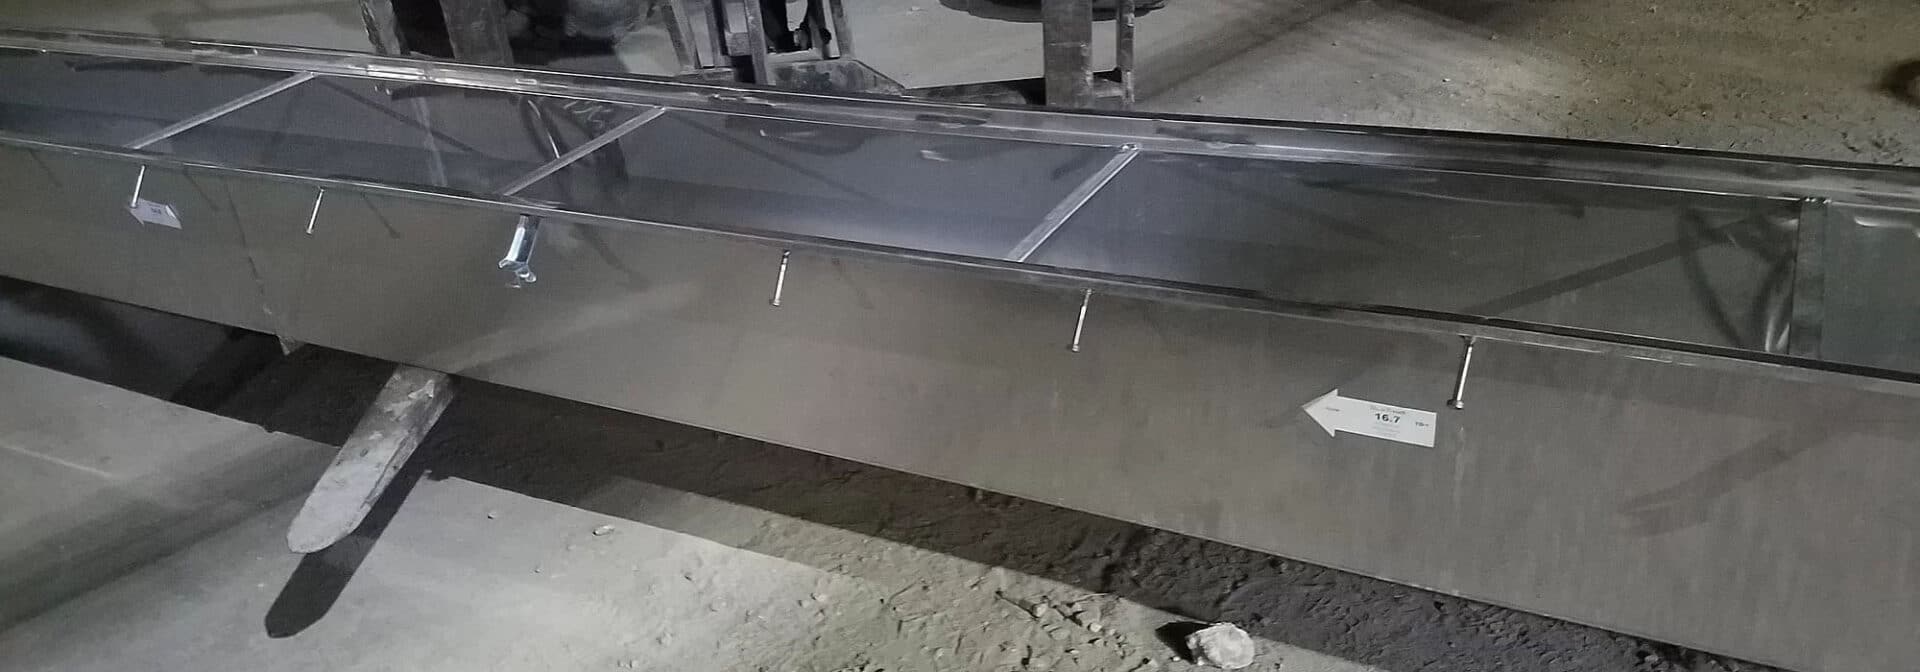 stainless steel trench drain